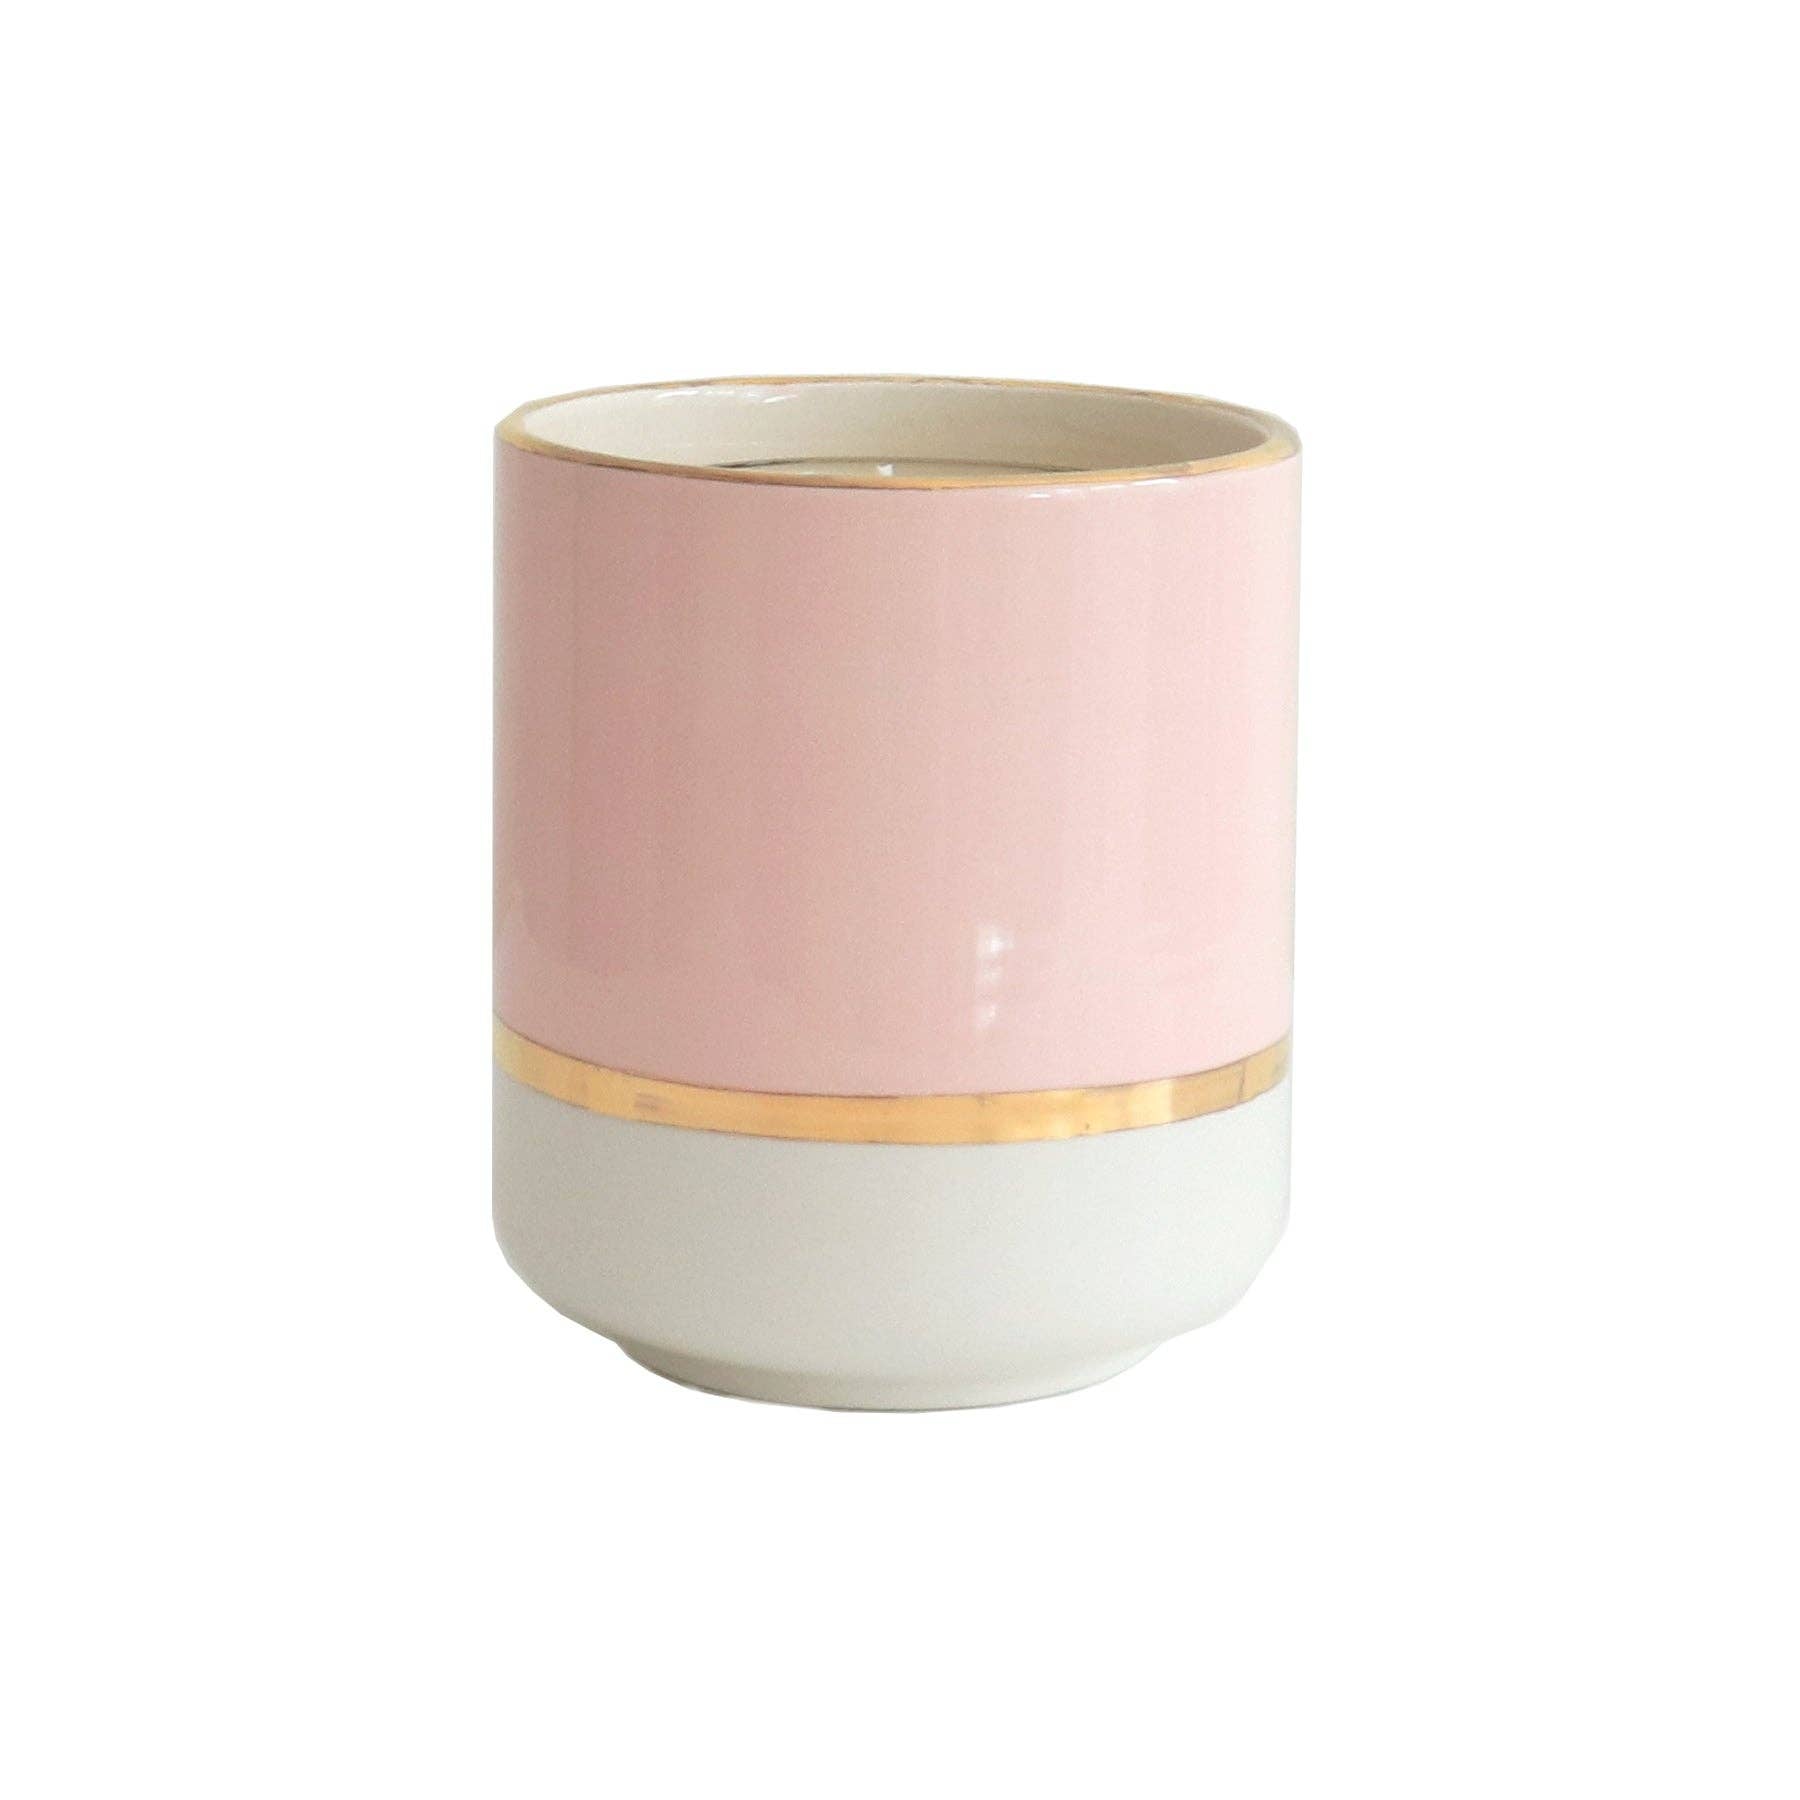 Color Block Vase in Cherry Blossom Pink - The Preppy Bunny